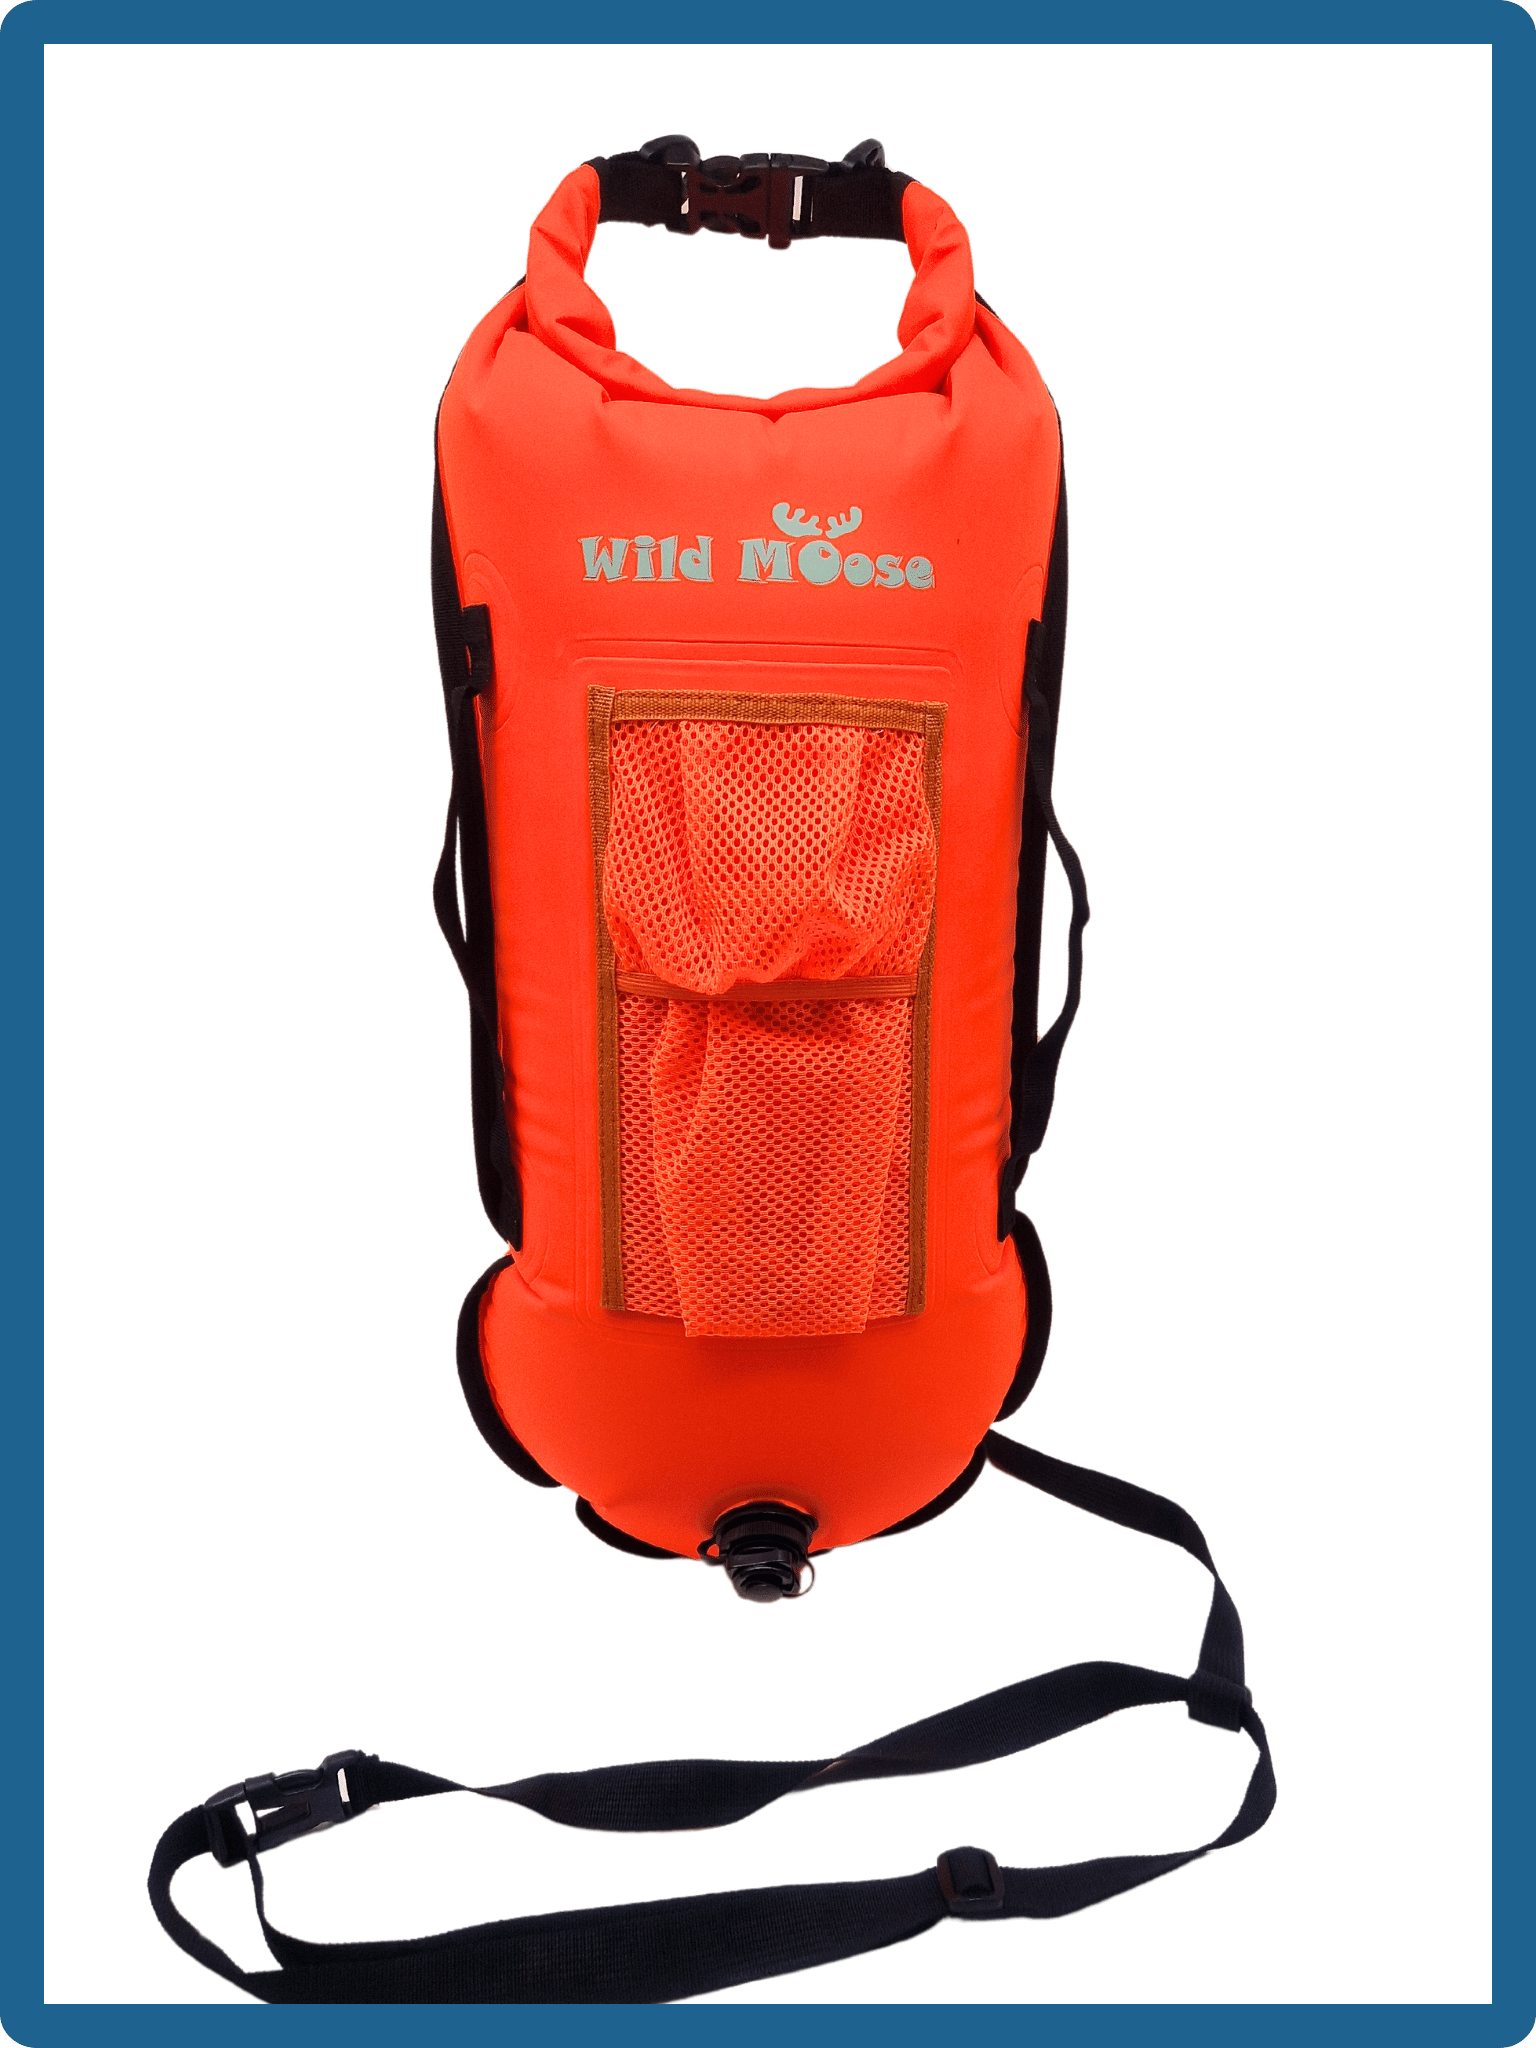 28L bright orange tow floats with mesh top pocket and black handles and leash